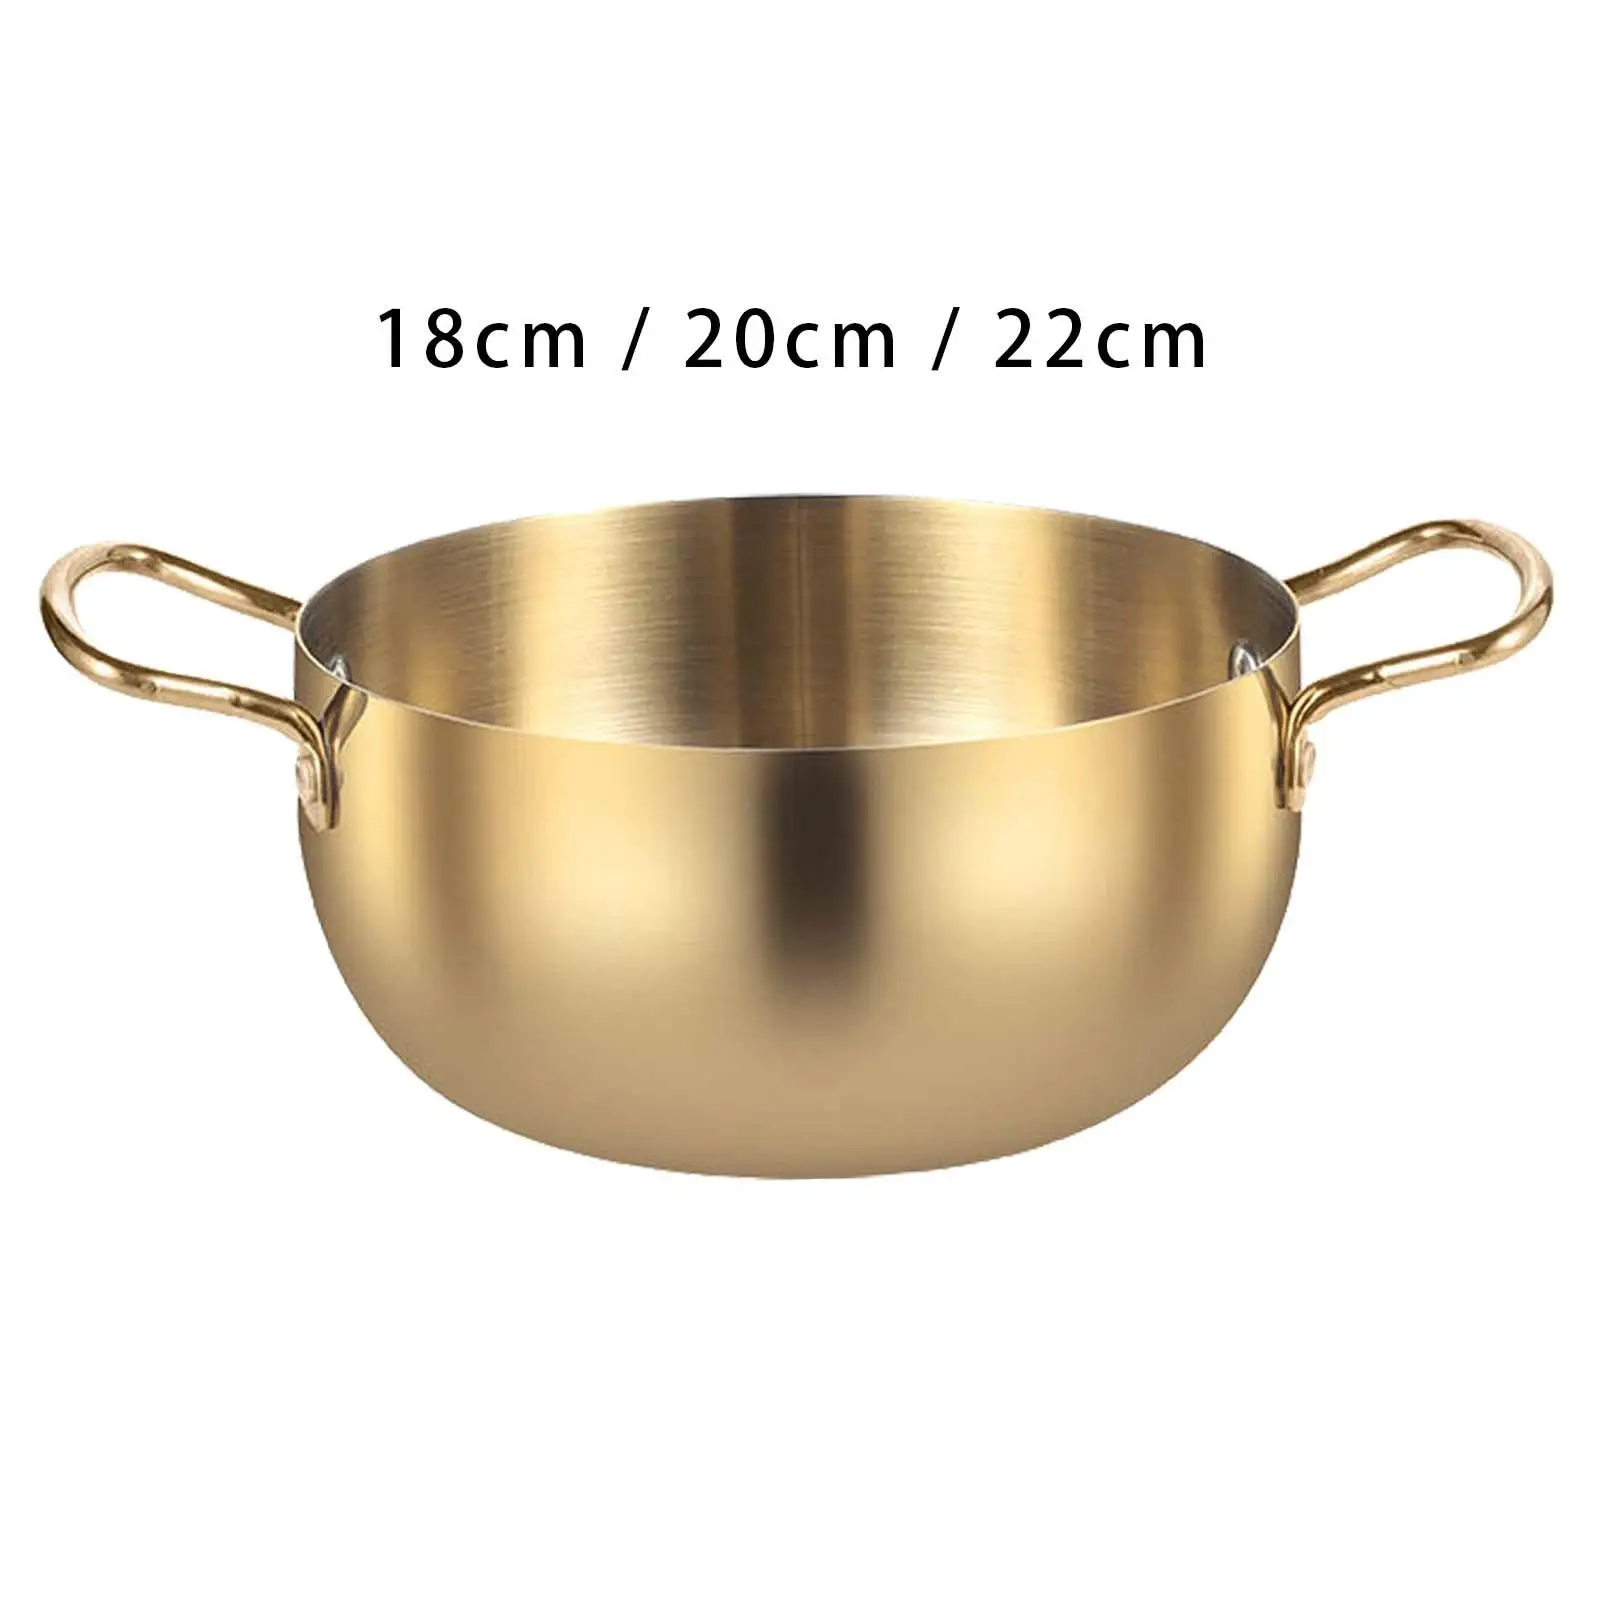 Ramen Cooking Pot with Handle Instant Noodles Pot for Backyard Picnic Stew